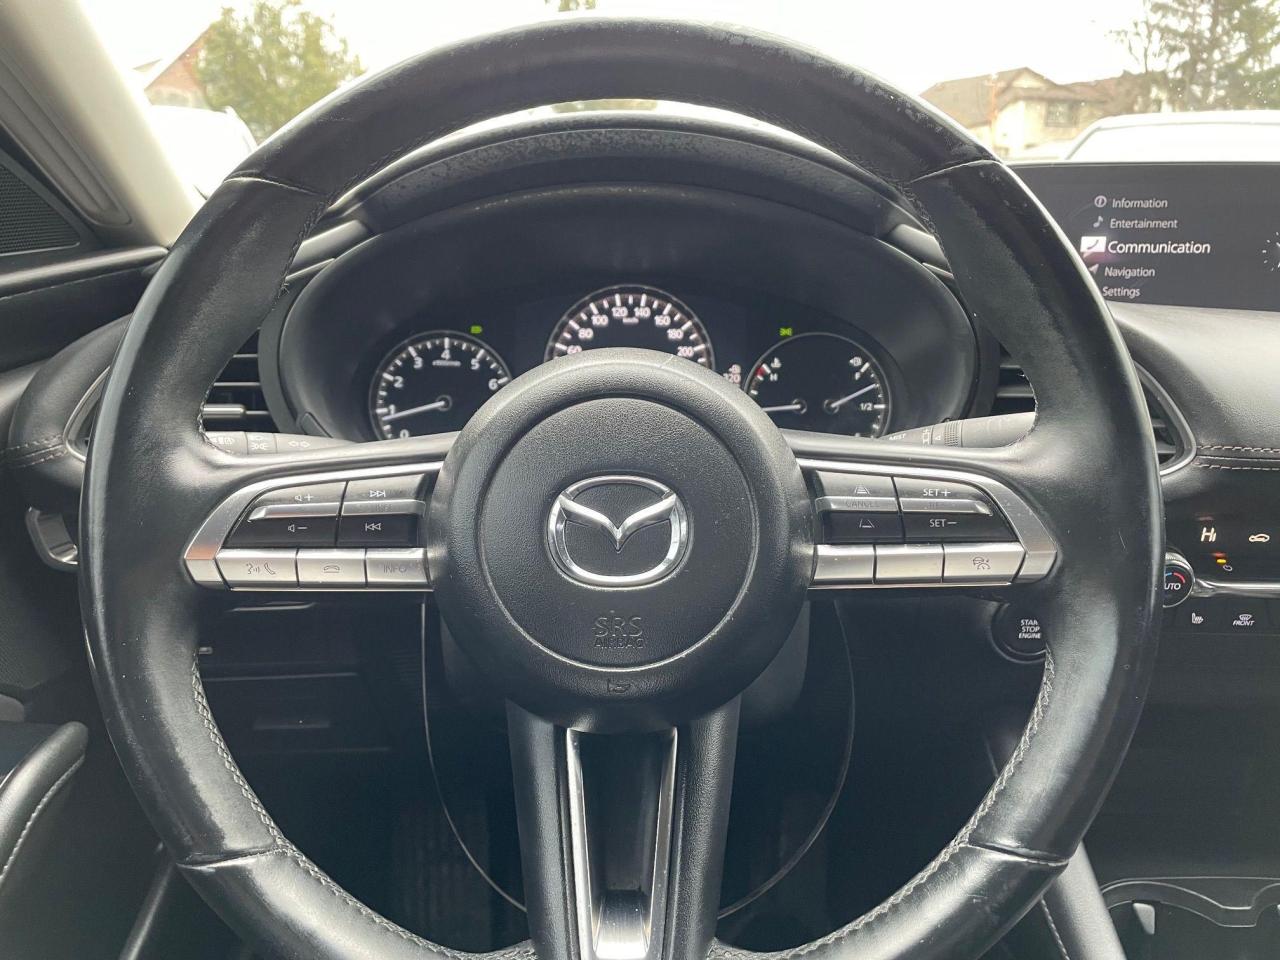 2019 Mazda MAZDA3 GS *AWD, SAFETY FEATURES, BACKUP CAM, LOW KM* - Photo #11